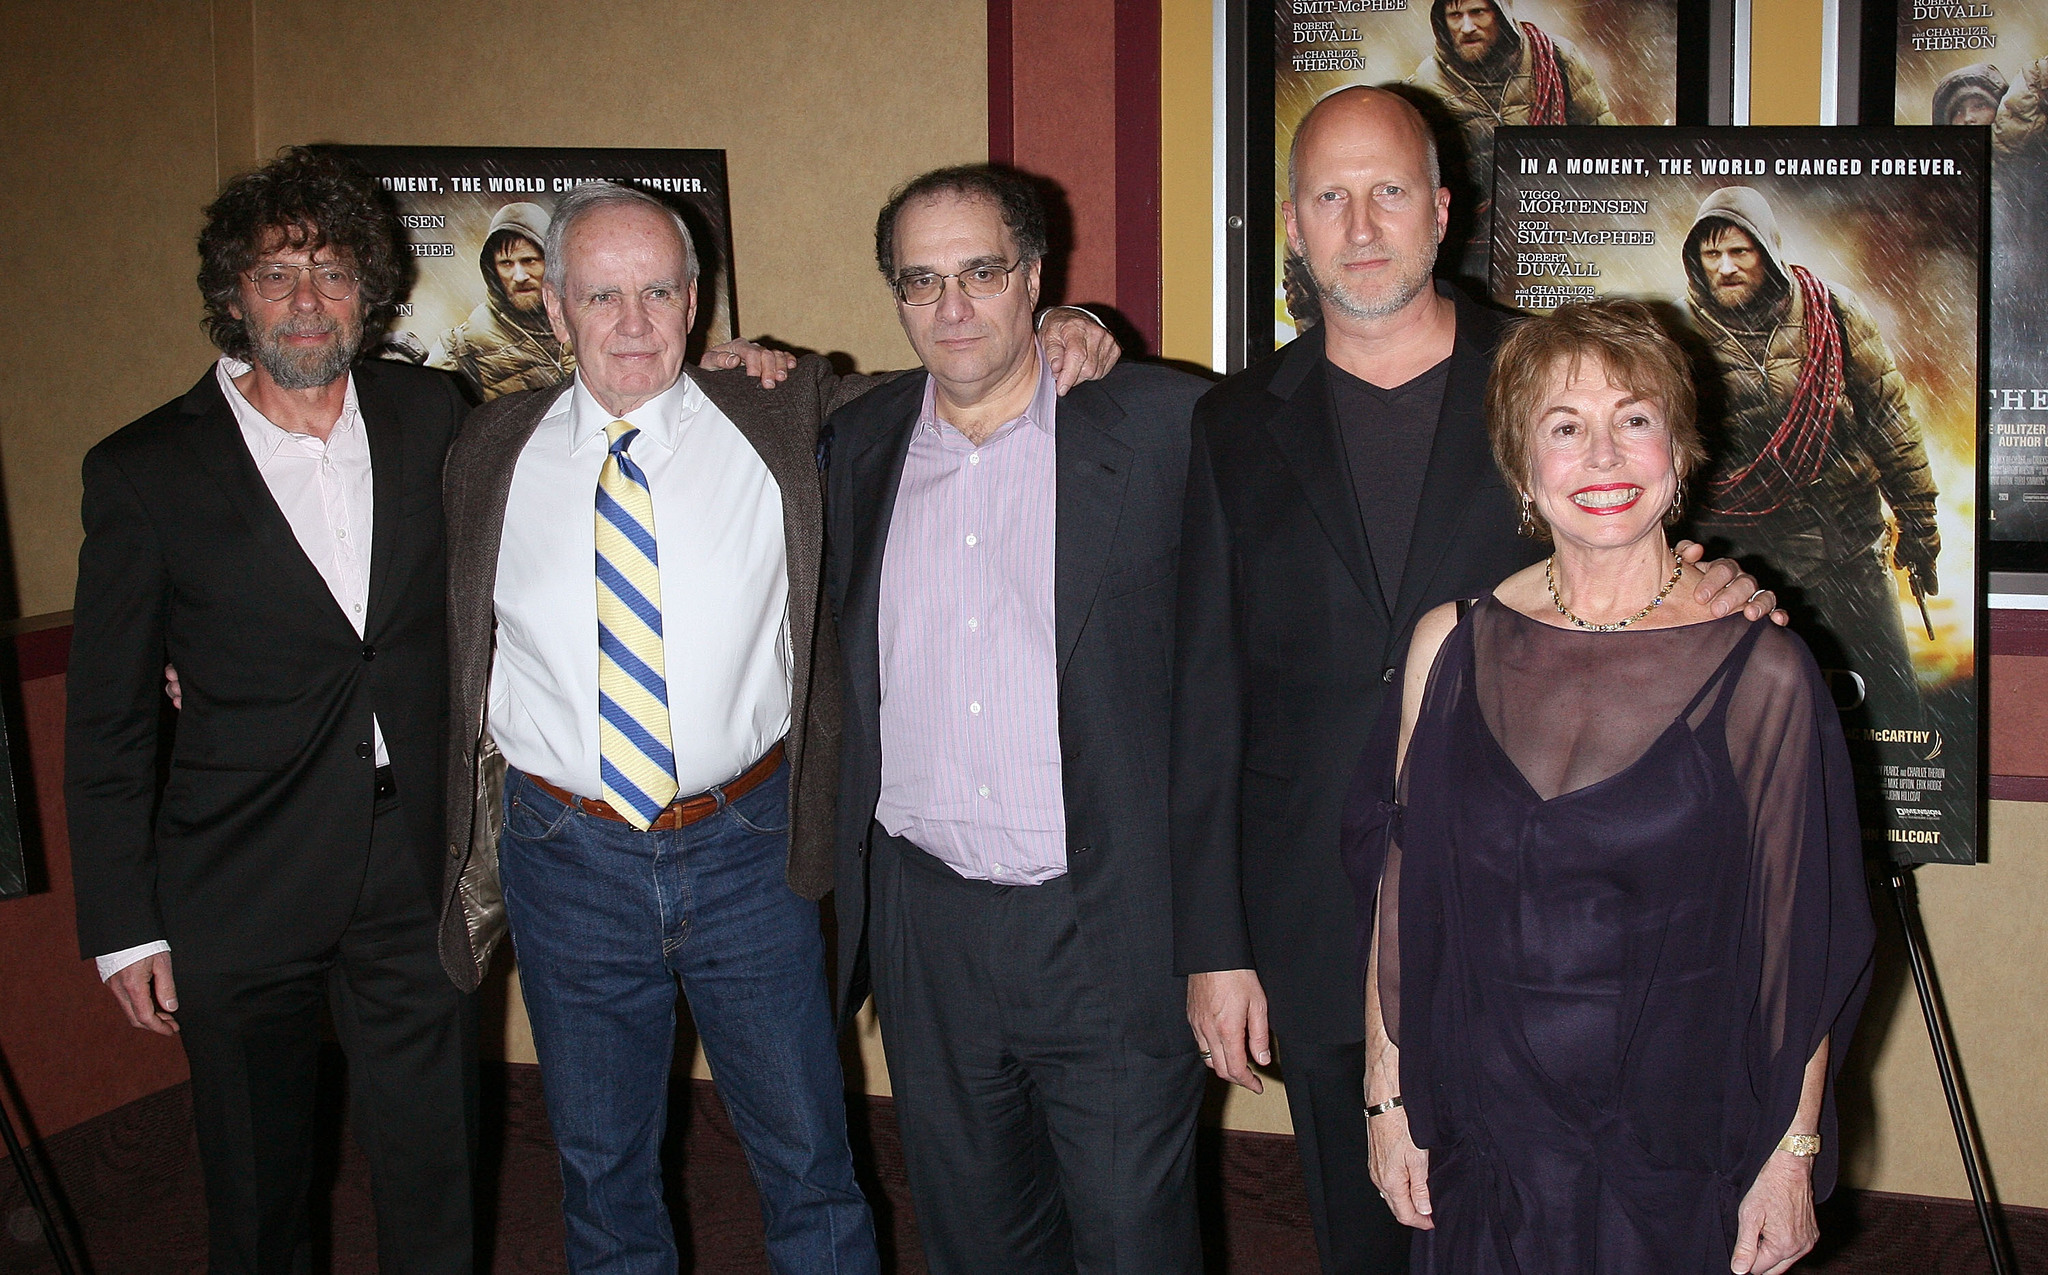 Producer Steve Schwartz, writer Cormac McCarthy, producer Bob Weinstein, director John Hillcoat and producer Paula Mae Schwartz attend the premiere of 'The Road' at Clearview Chelsea Cinemas on November 16, 2009 in New York City.